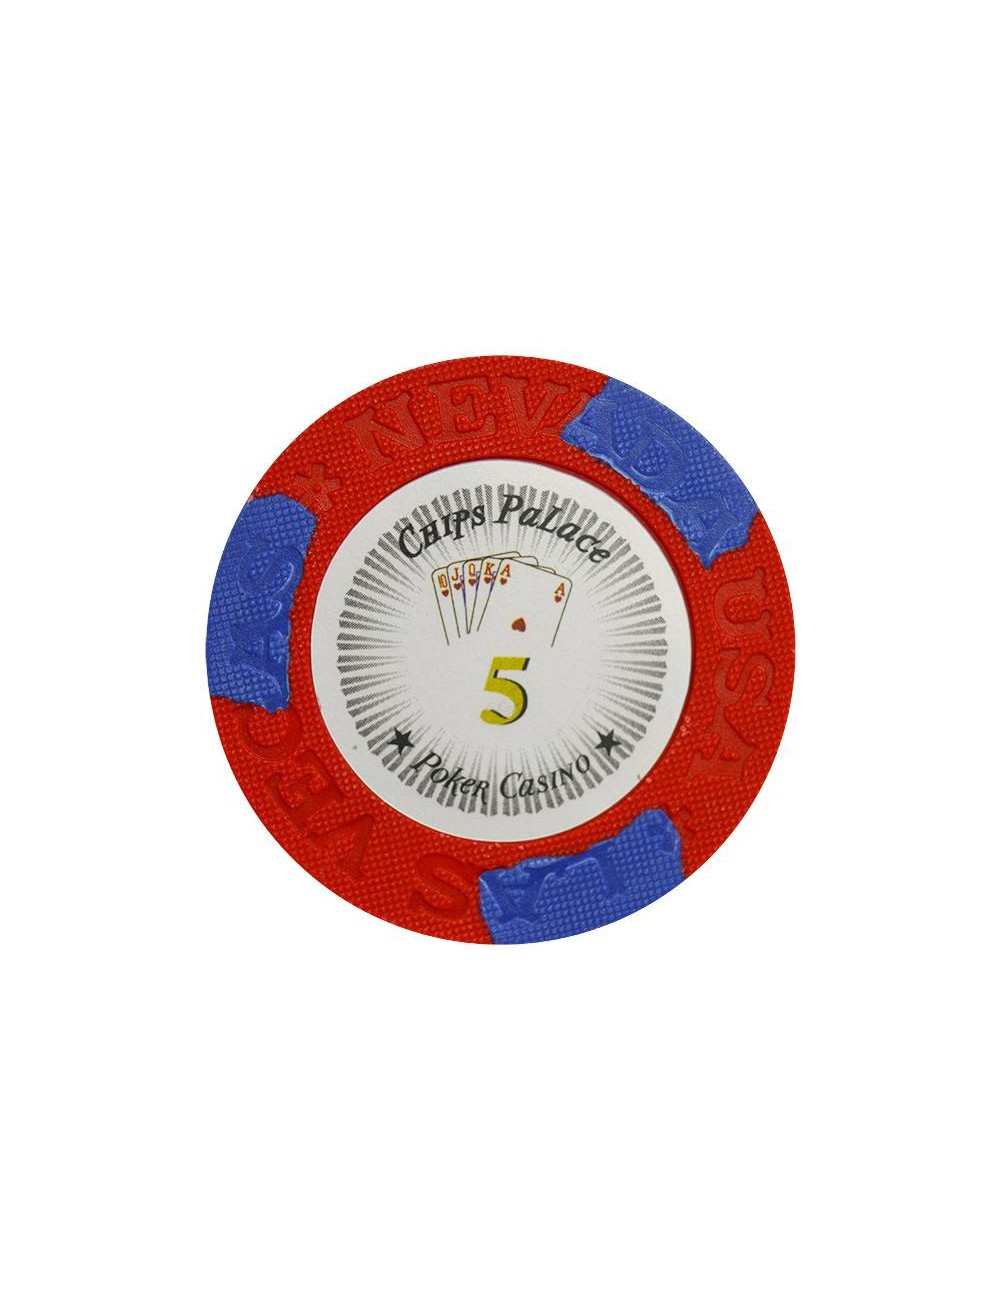 Poker chip "LAS VEGAS 5" - made of clay composite with metal insert - 14g - sold individually.